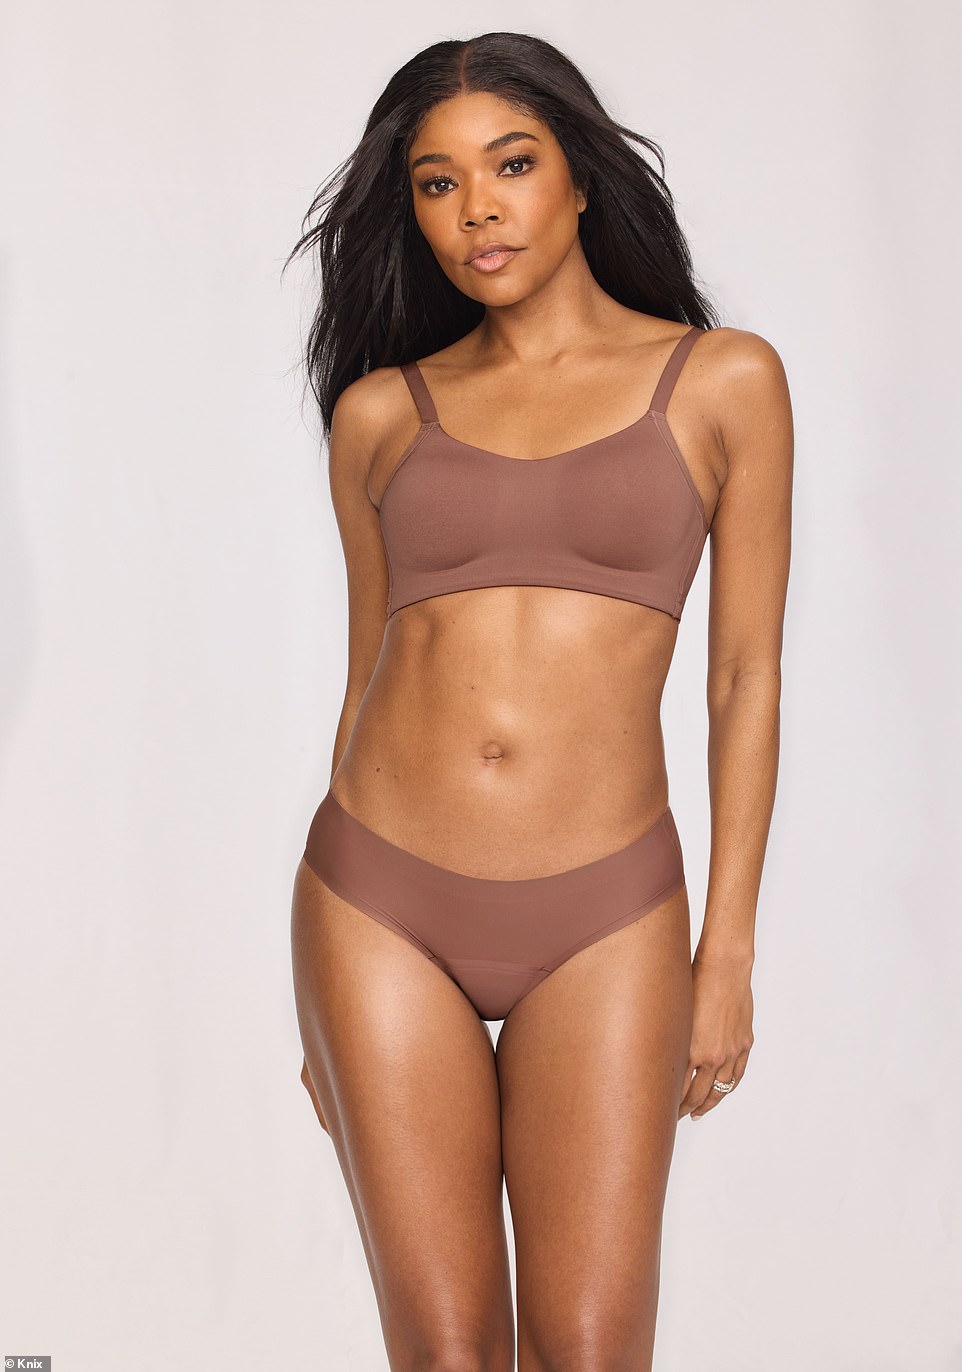 Gabrielle Union has been named the newest brand ambassador for intimate and clothing brand Knix.  Knix debuted this collaboration on Wednesday with their new campaign and slogan Knix for Life